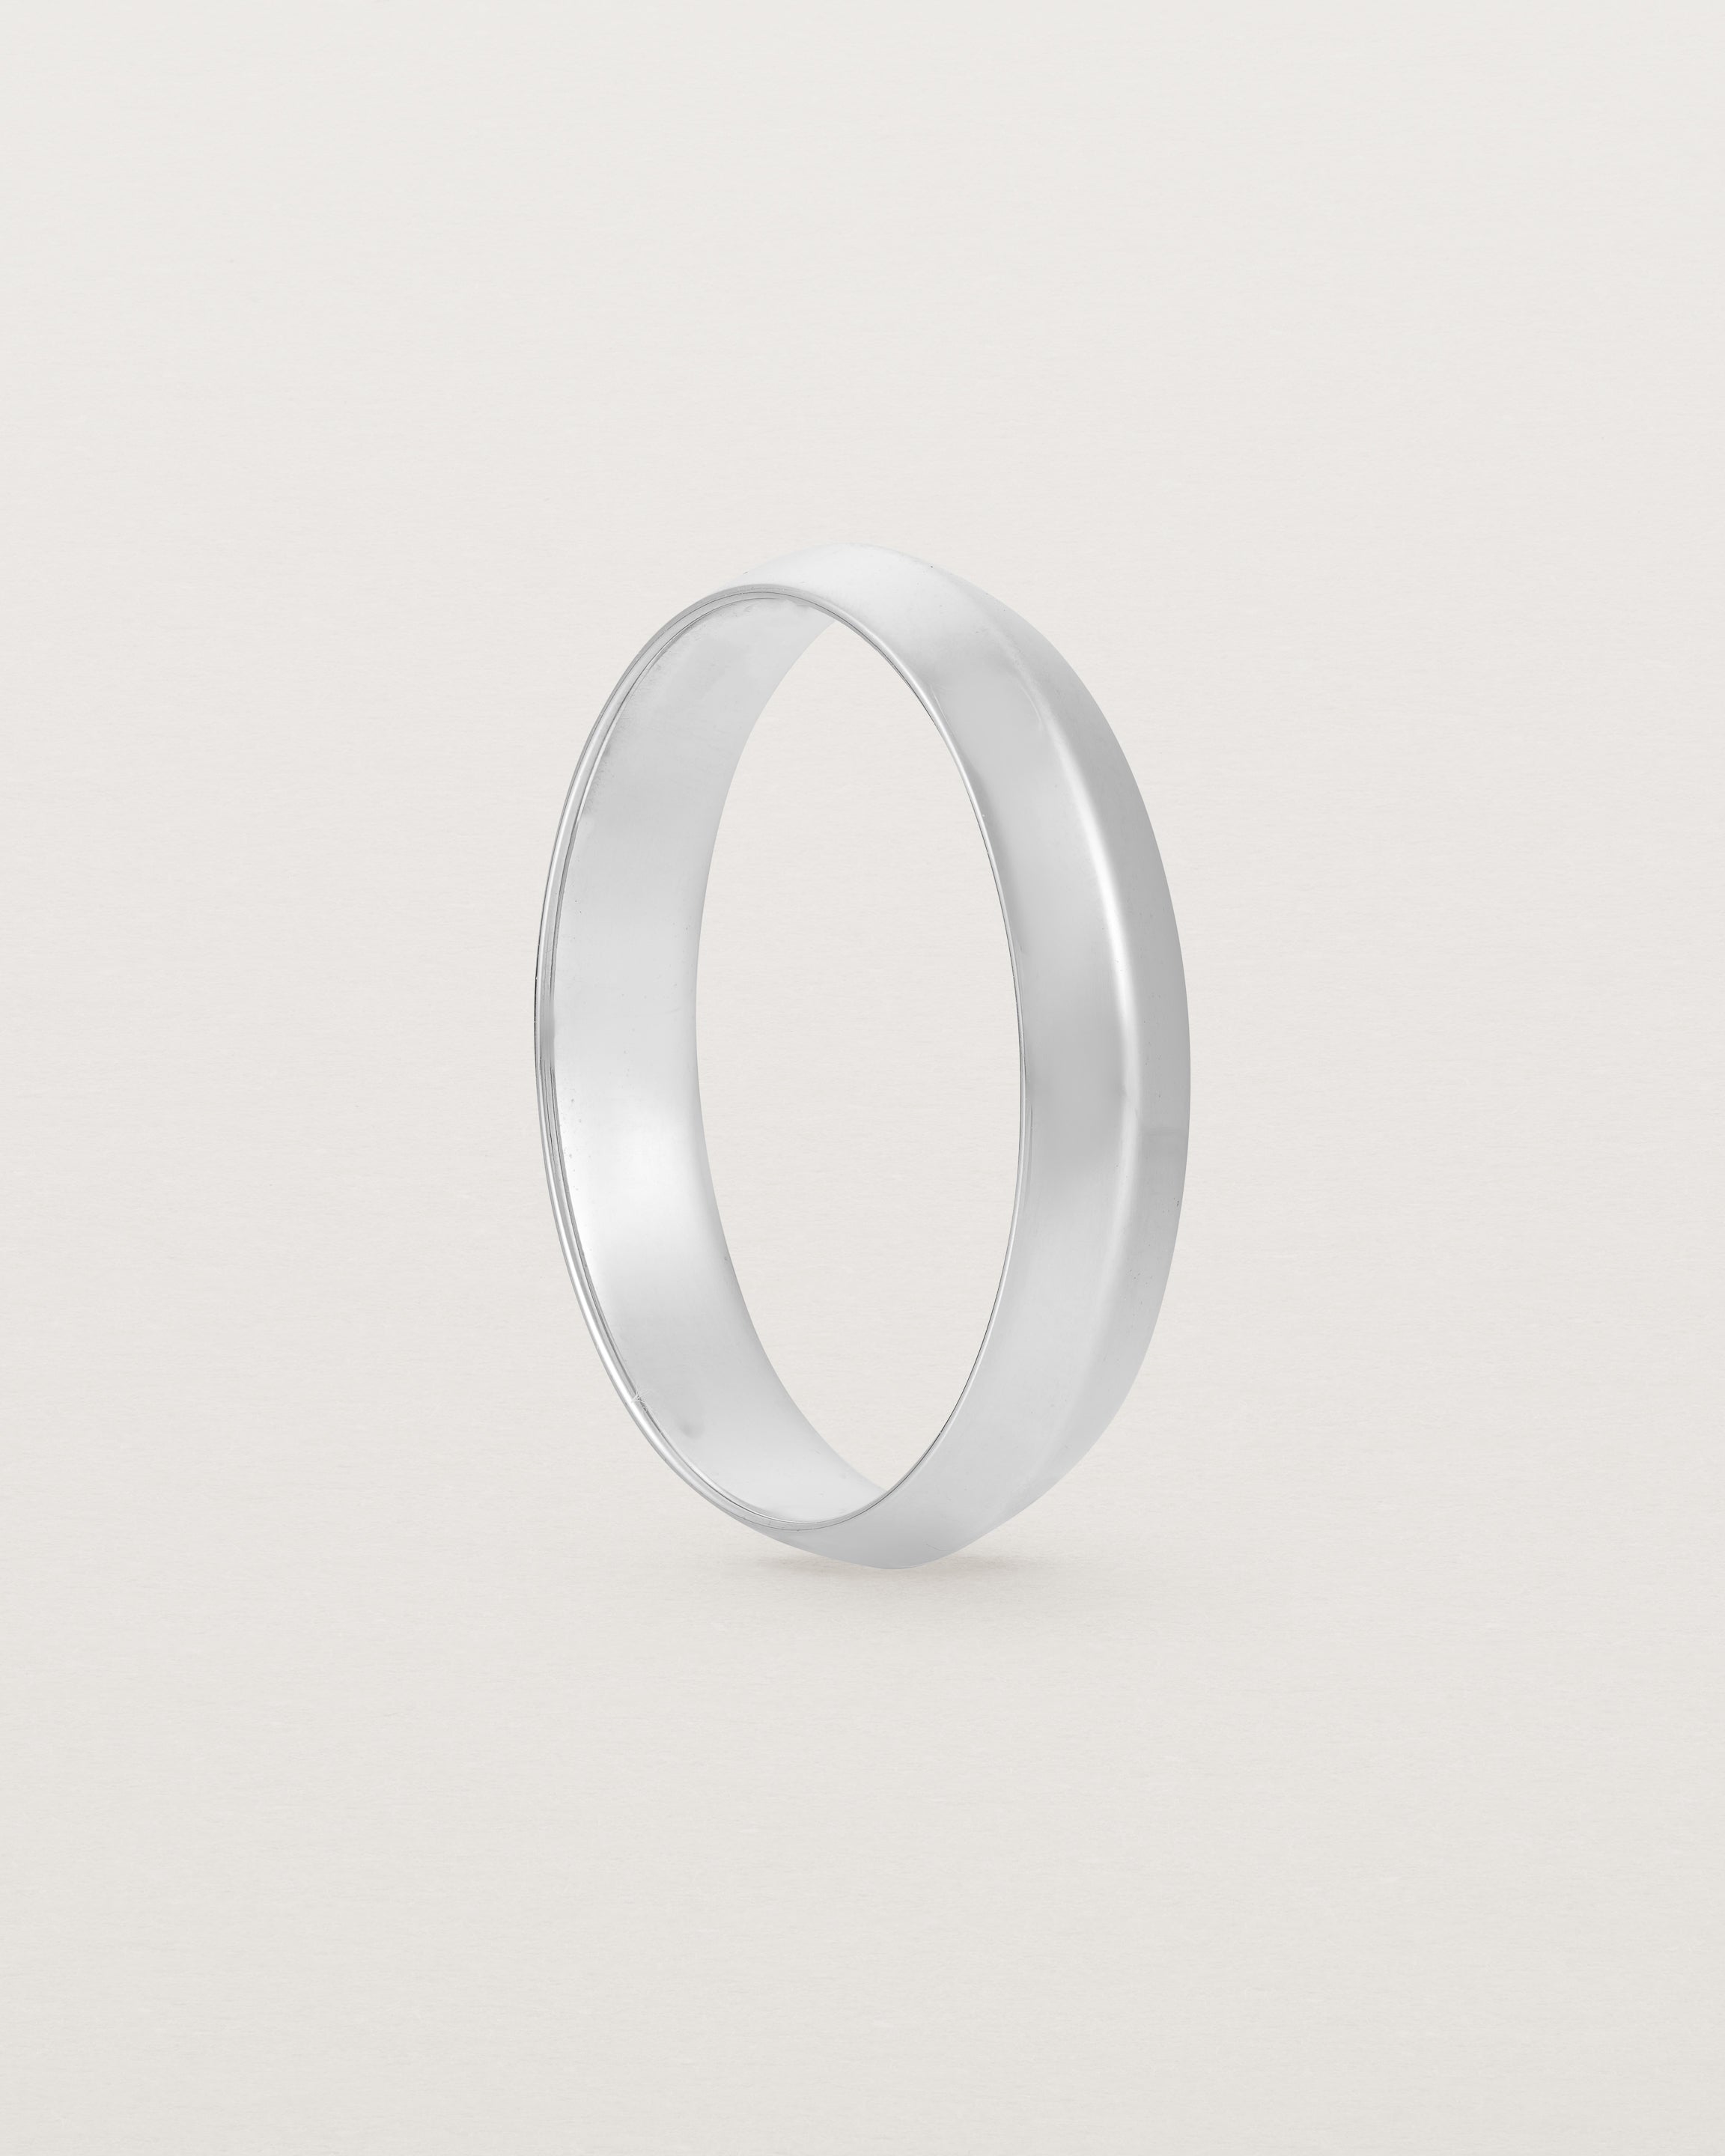 Standing view of the Knife Edge Wedding Ring | 4mm | White Gold.